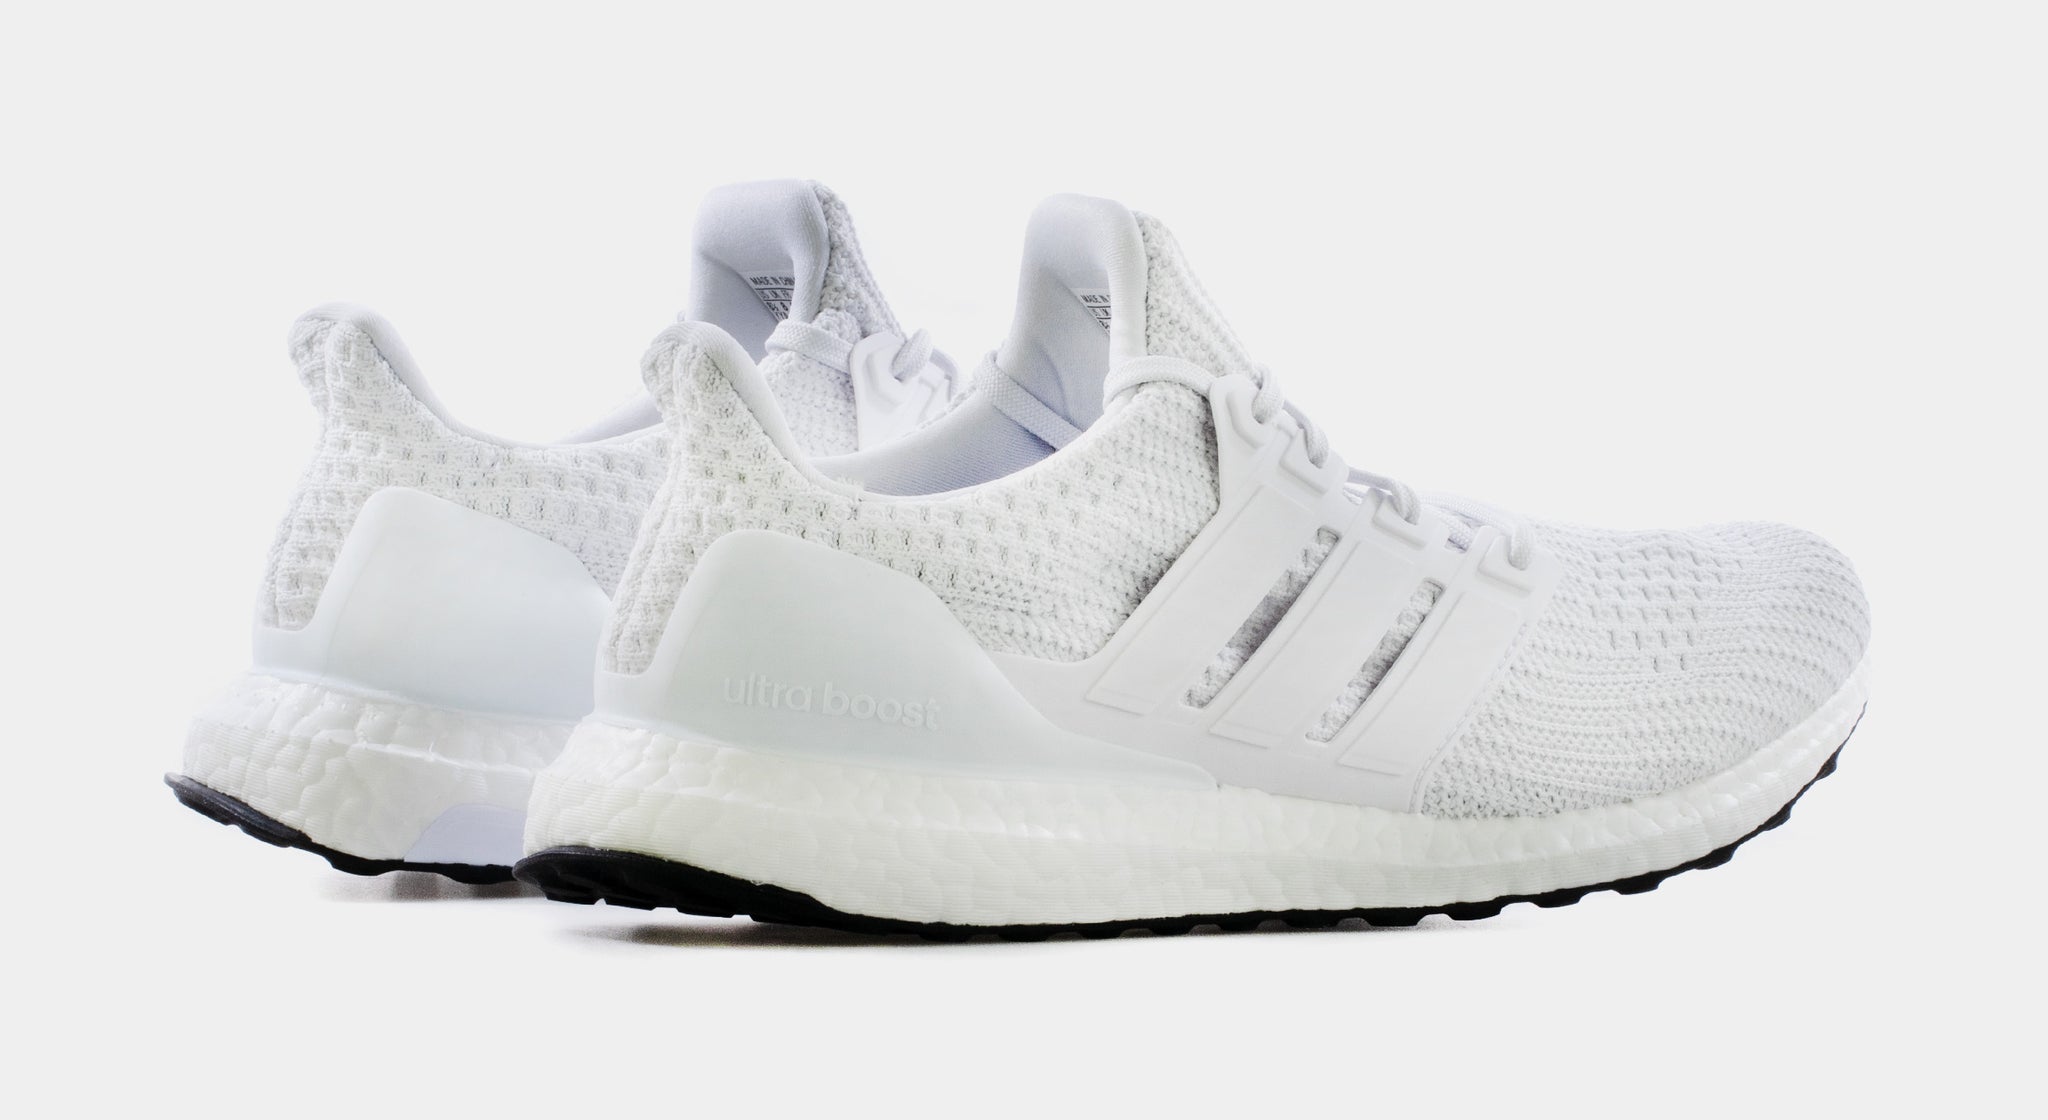 adidas Ultraboost 4.0 DNA Mens Running Shoes White Black FY9120